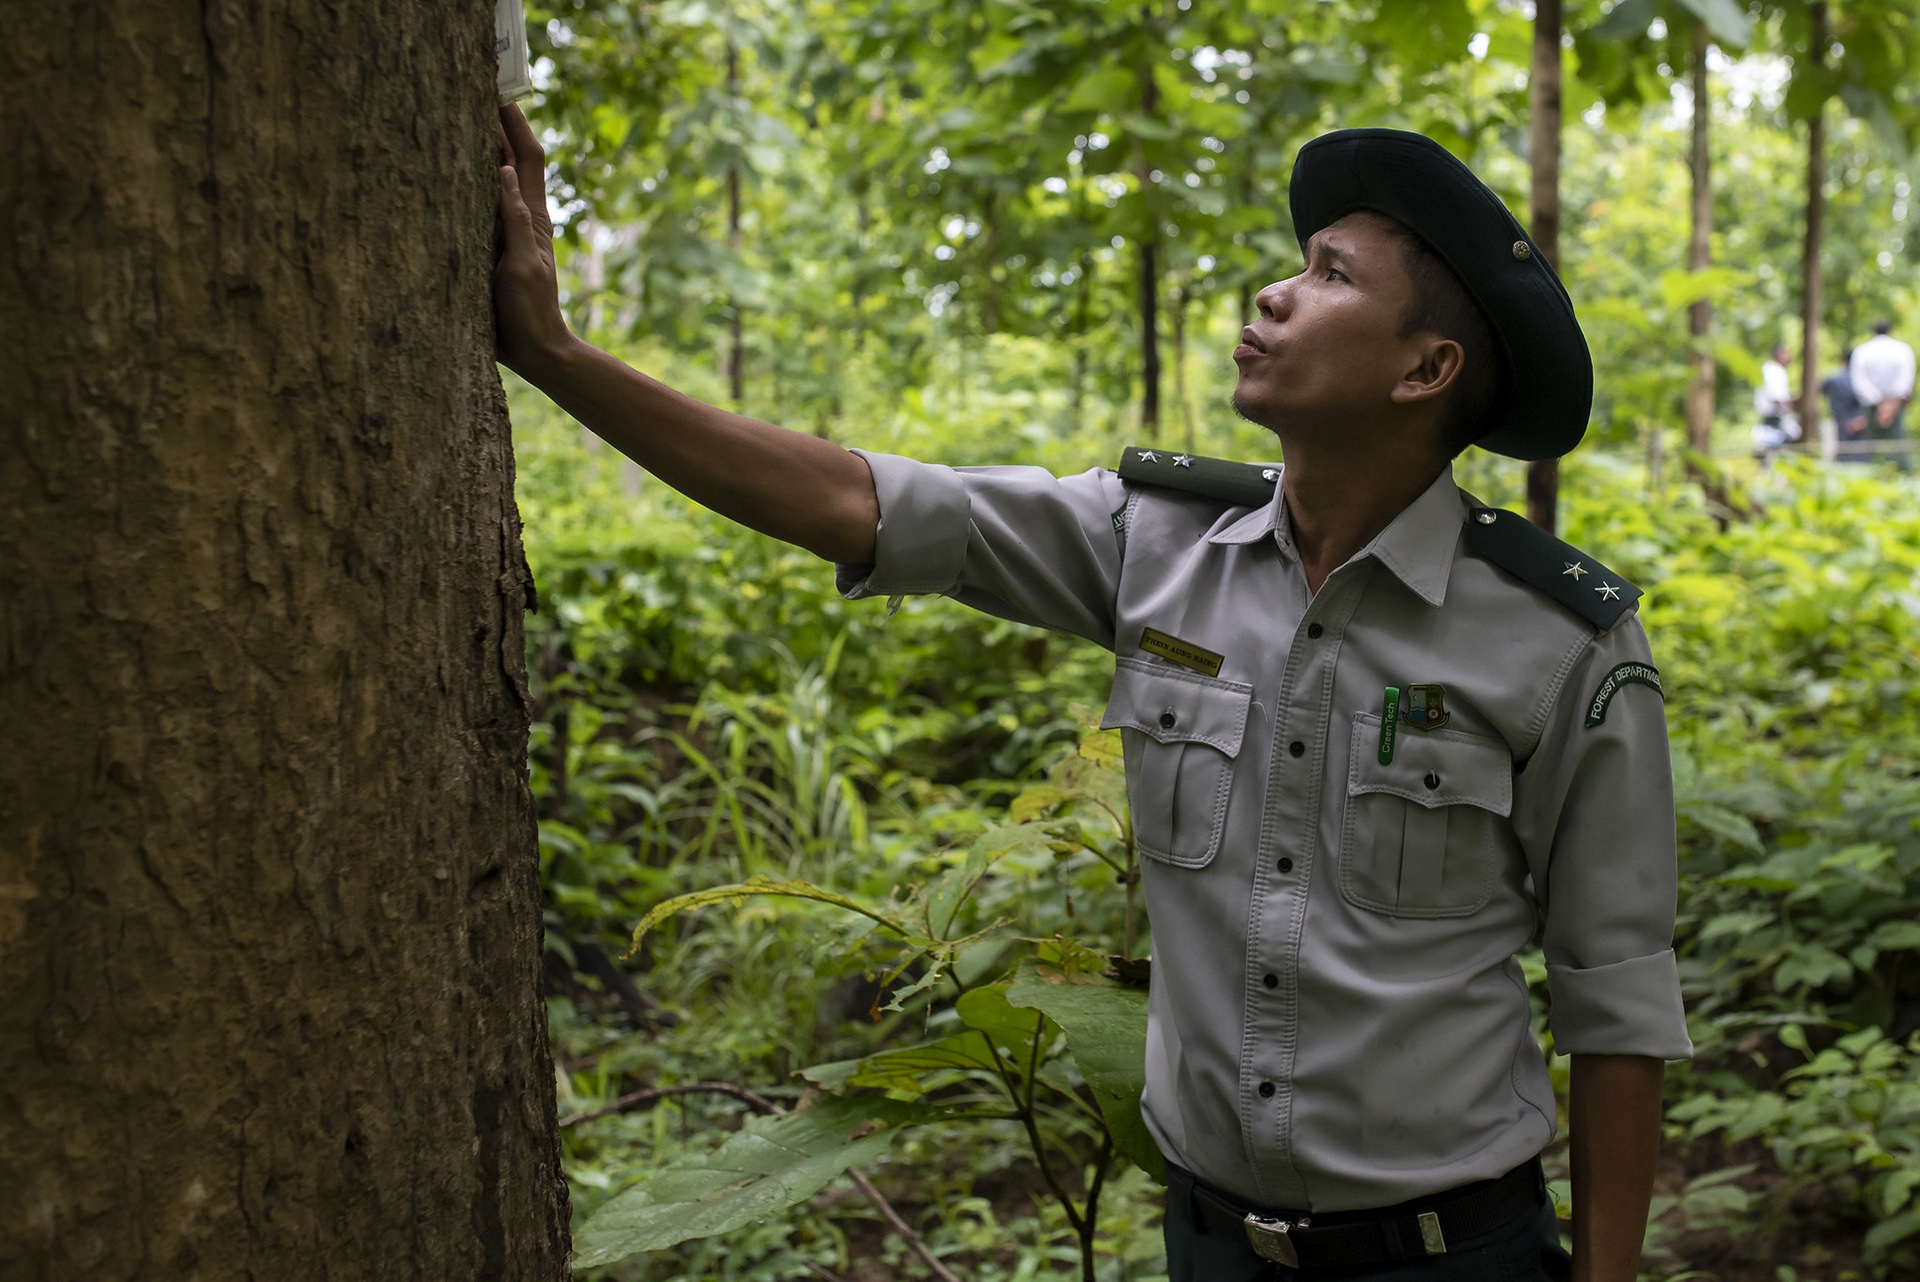  Working Together to Save Myanmar’s Forests